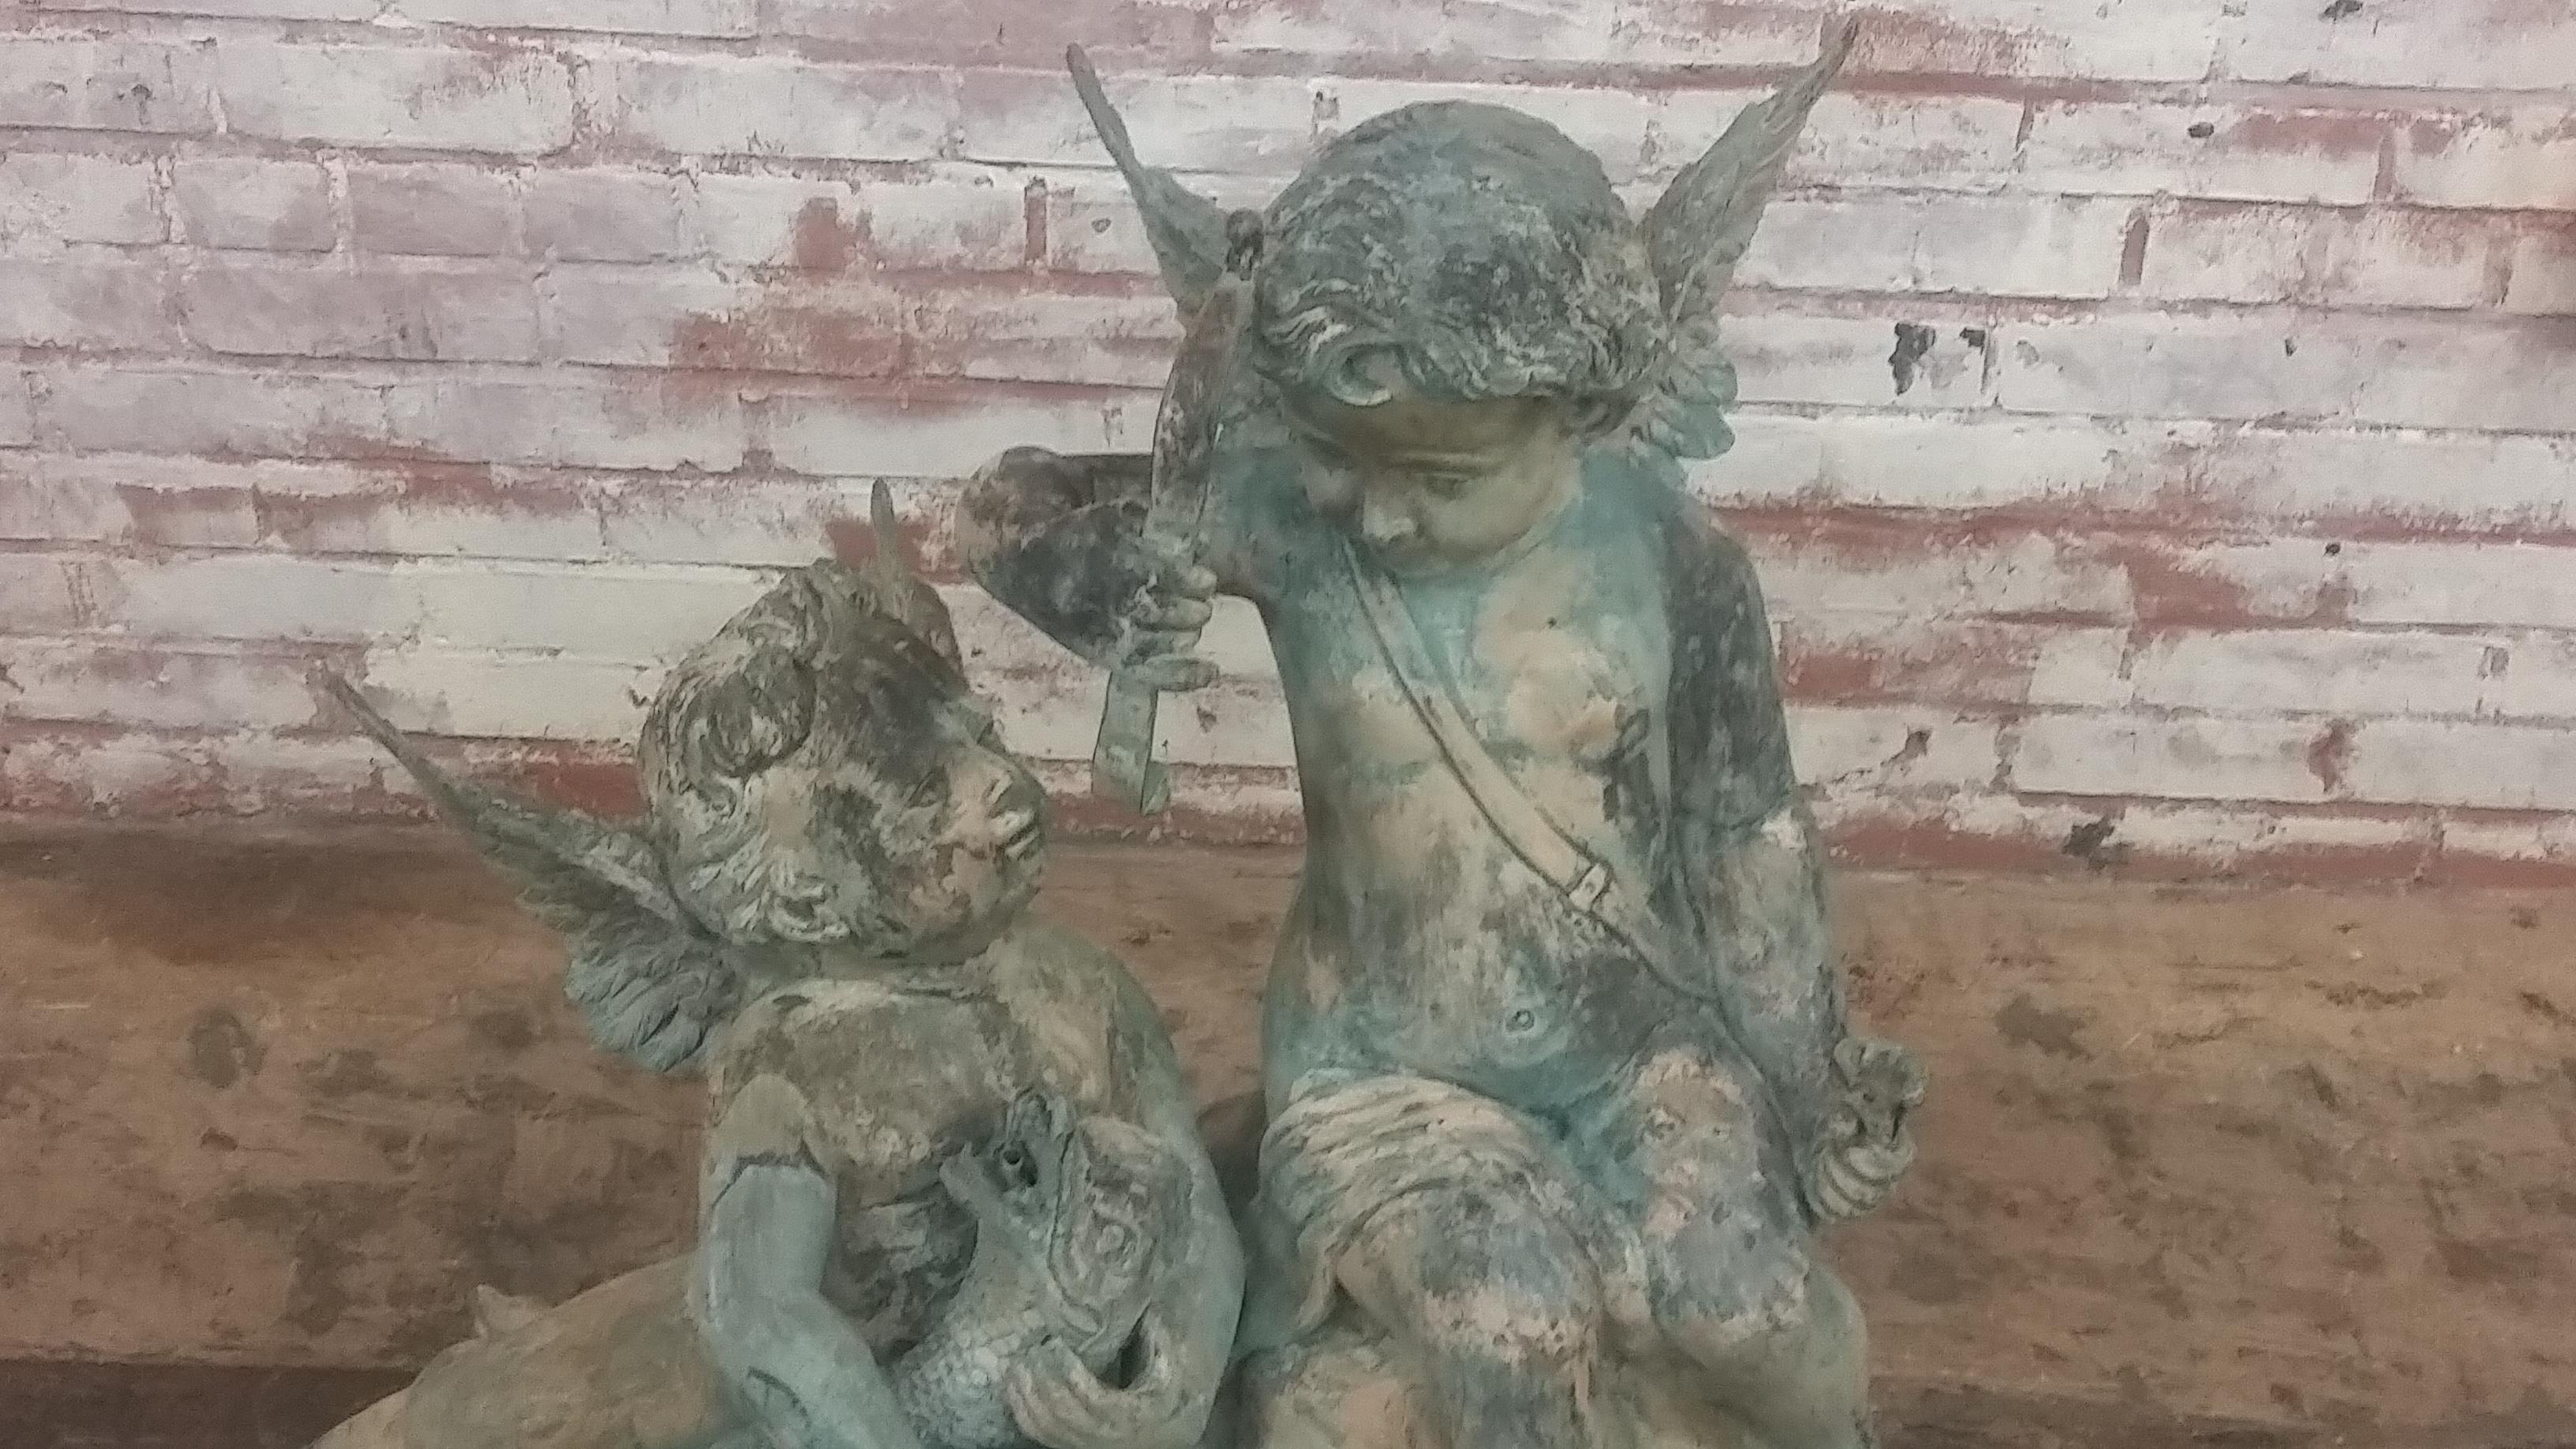 Beautiful fountain figure (no basin) with great patina finish. A late 20th century reproduction. Two winged cherubs. One with a bow and the other holding a mythological dolphin. Great centerpiece for garden or property entrance.